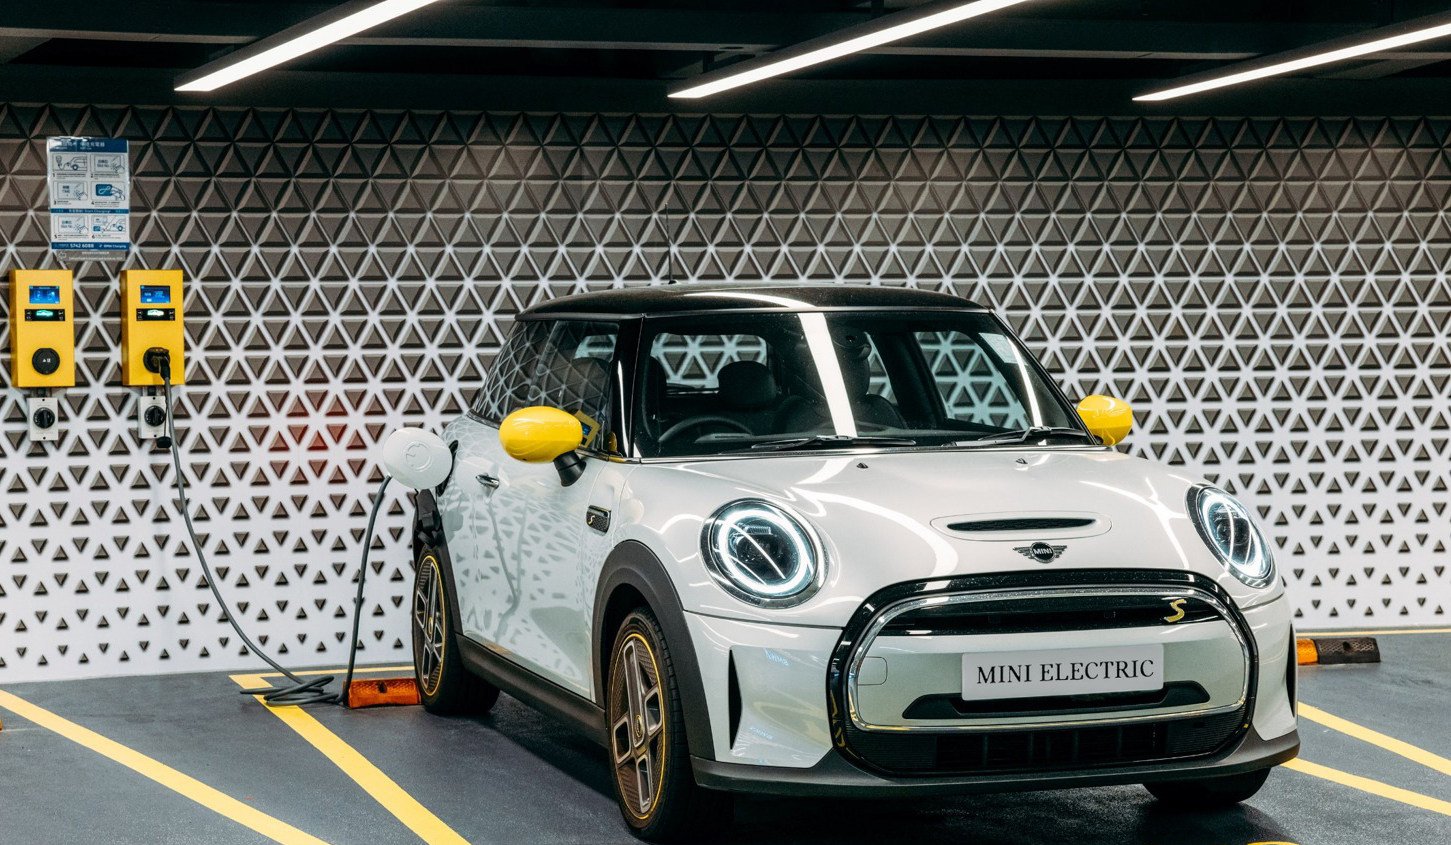 BMW produces 40,000 Mini electric cars in Cowley, UK. Photo: Handout